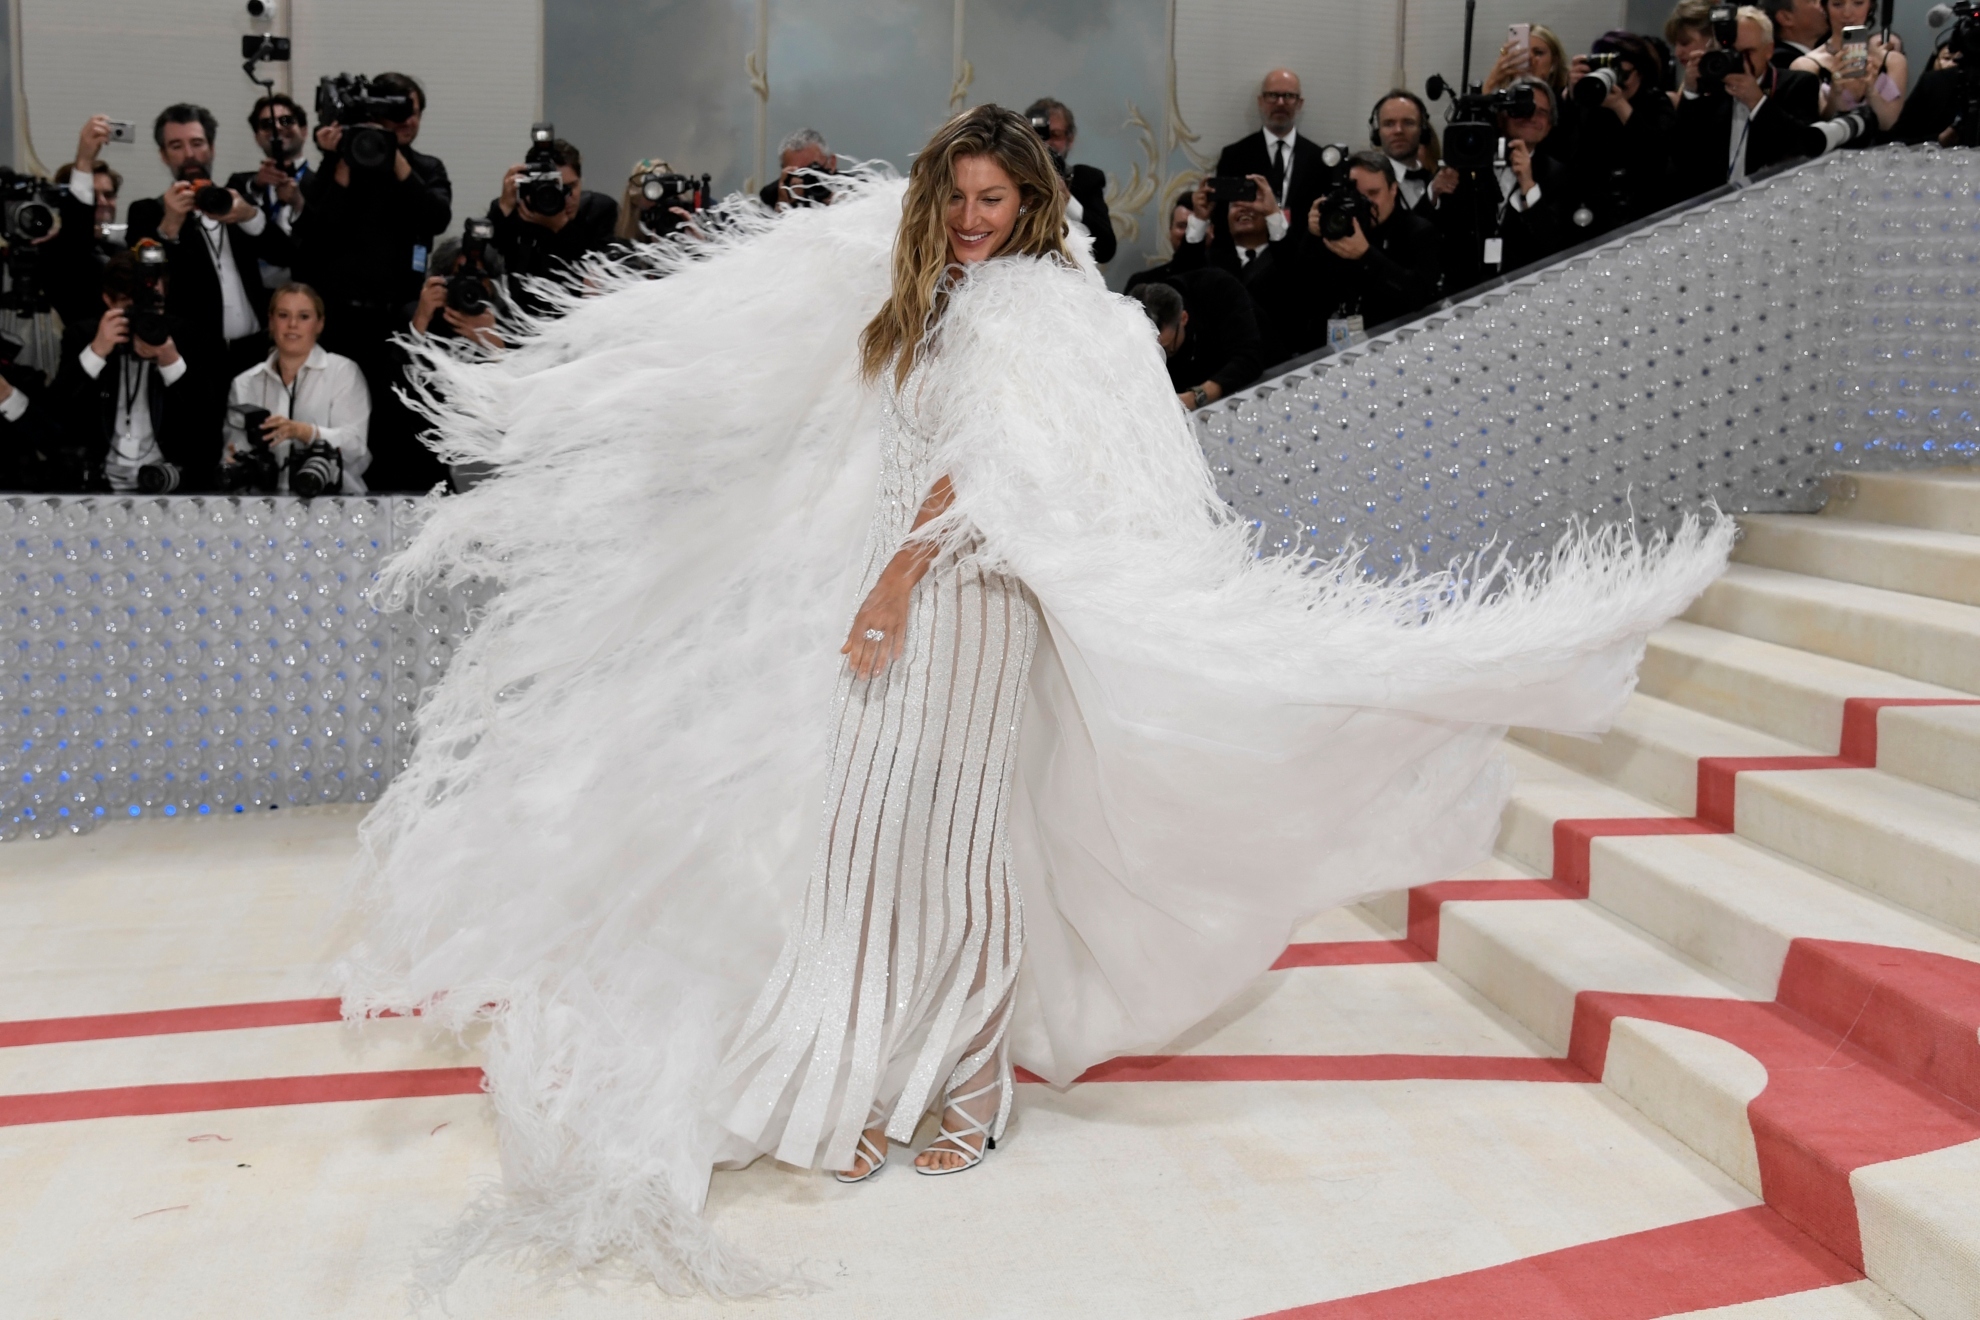 Image of Gisele Bndchen at the Met Gala